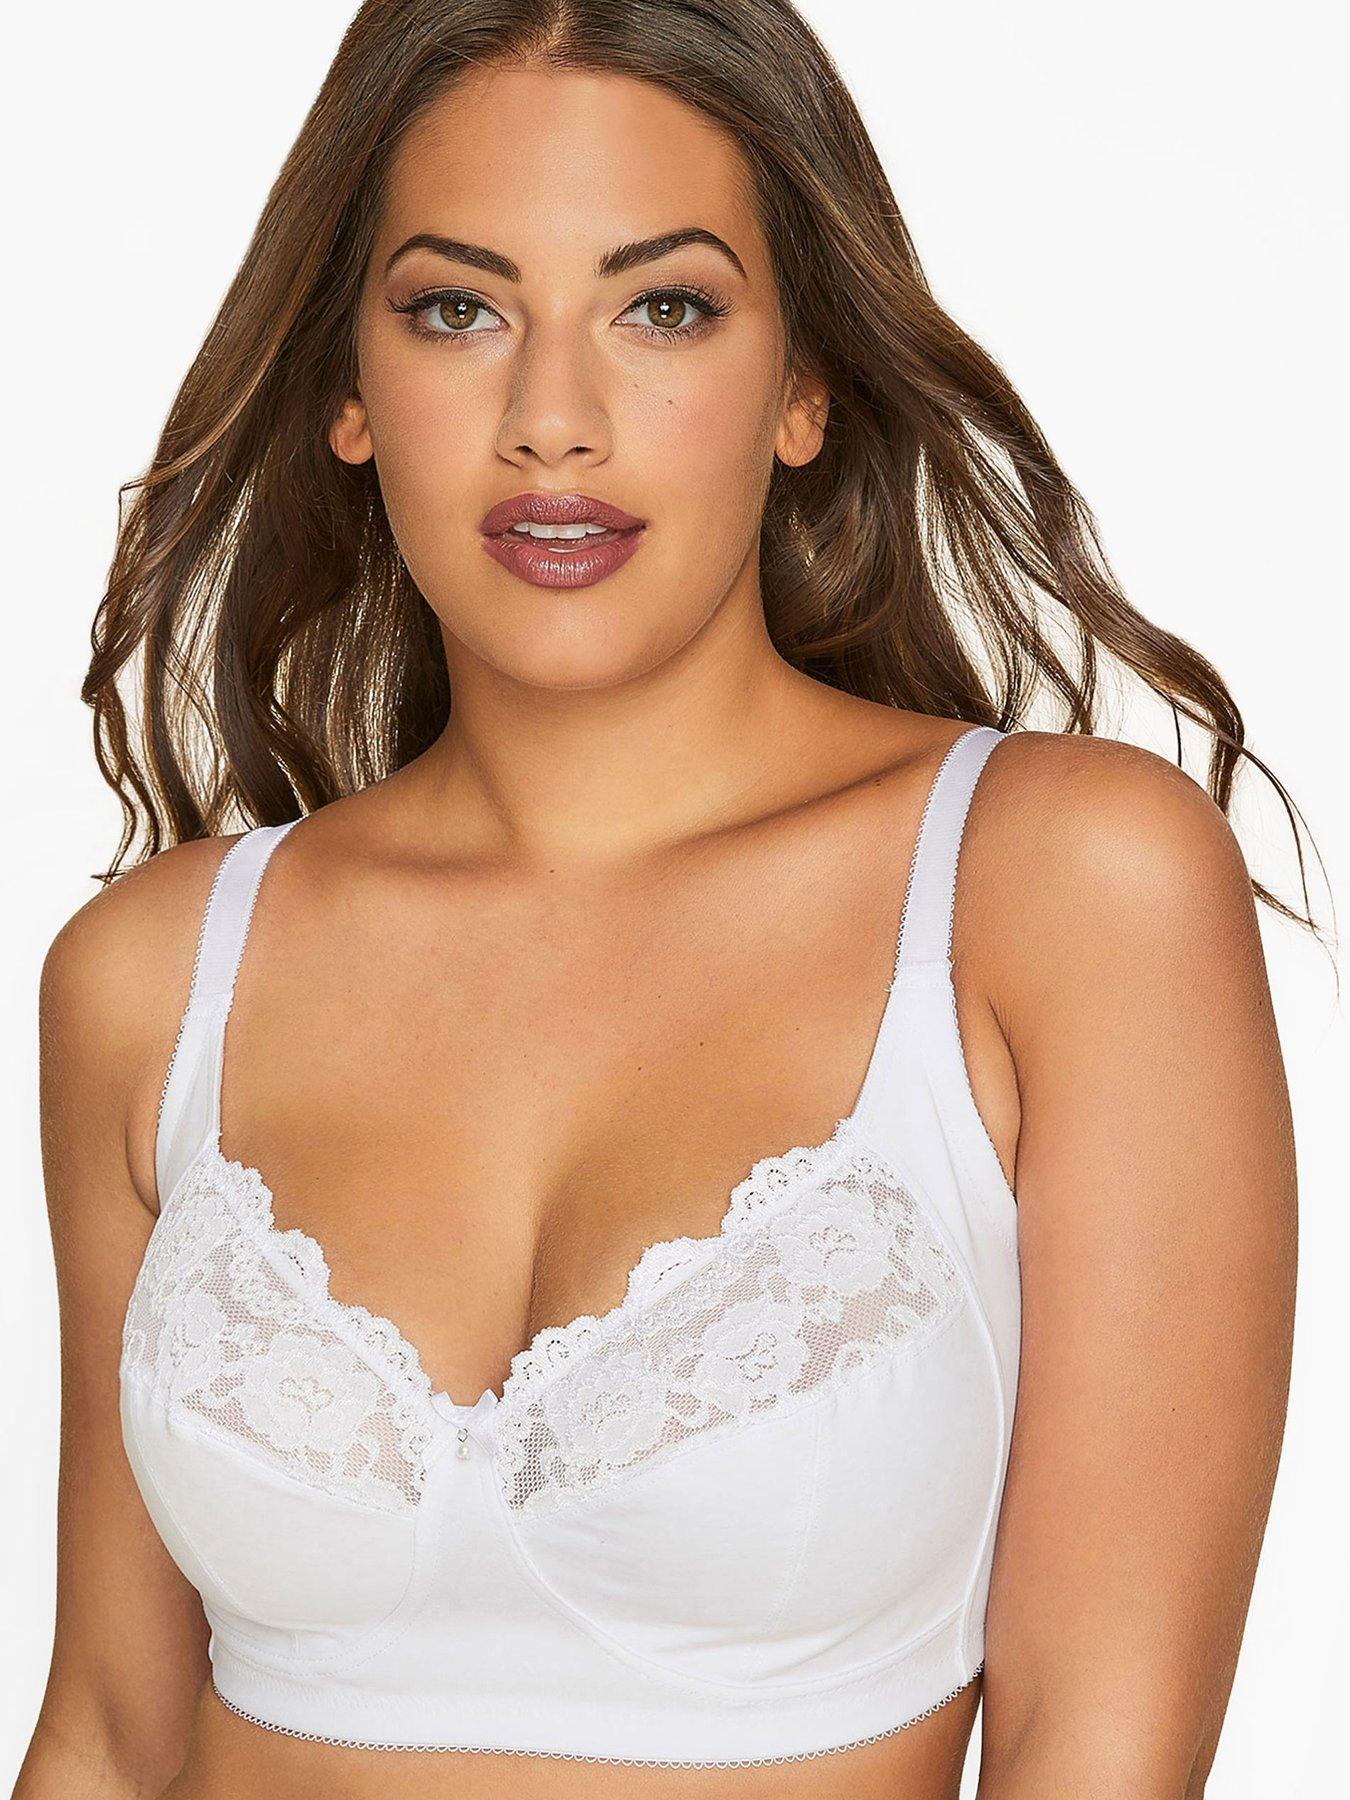 Buy OOLA LINGERIE Lace & Logo Non Wired Soft Bra 44DD, Bras